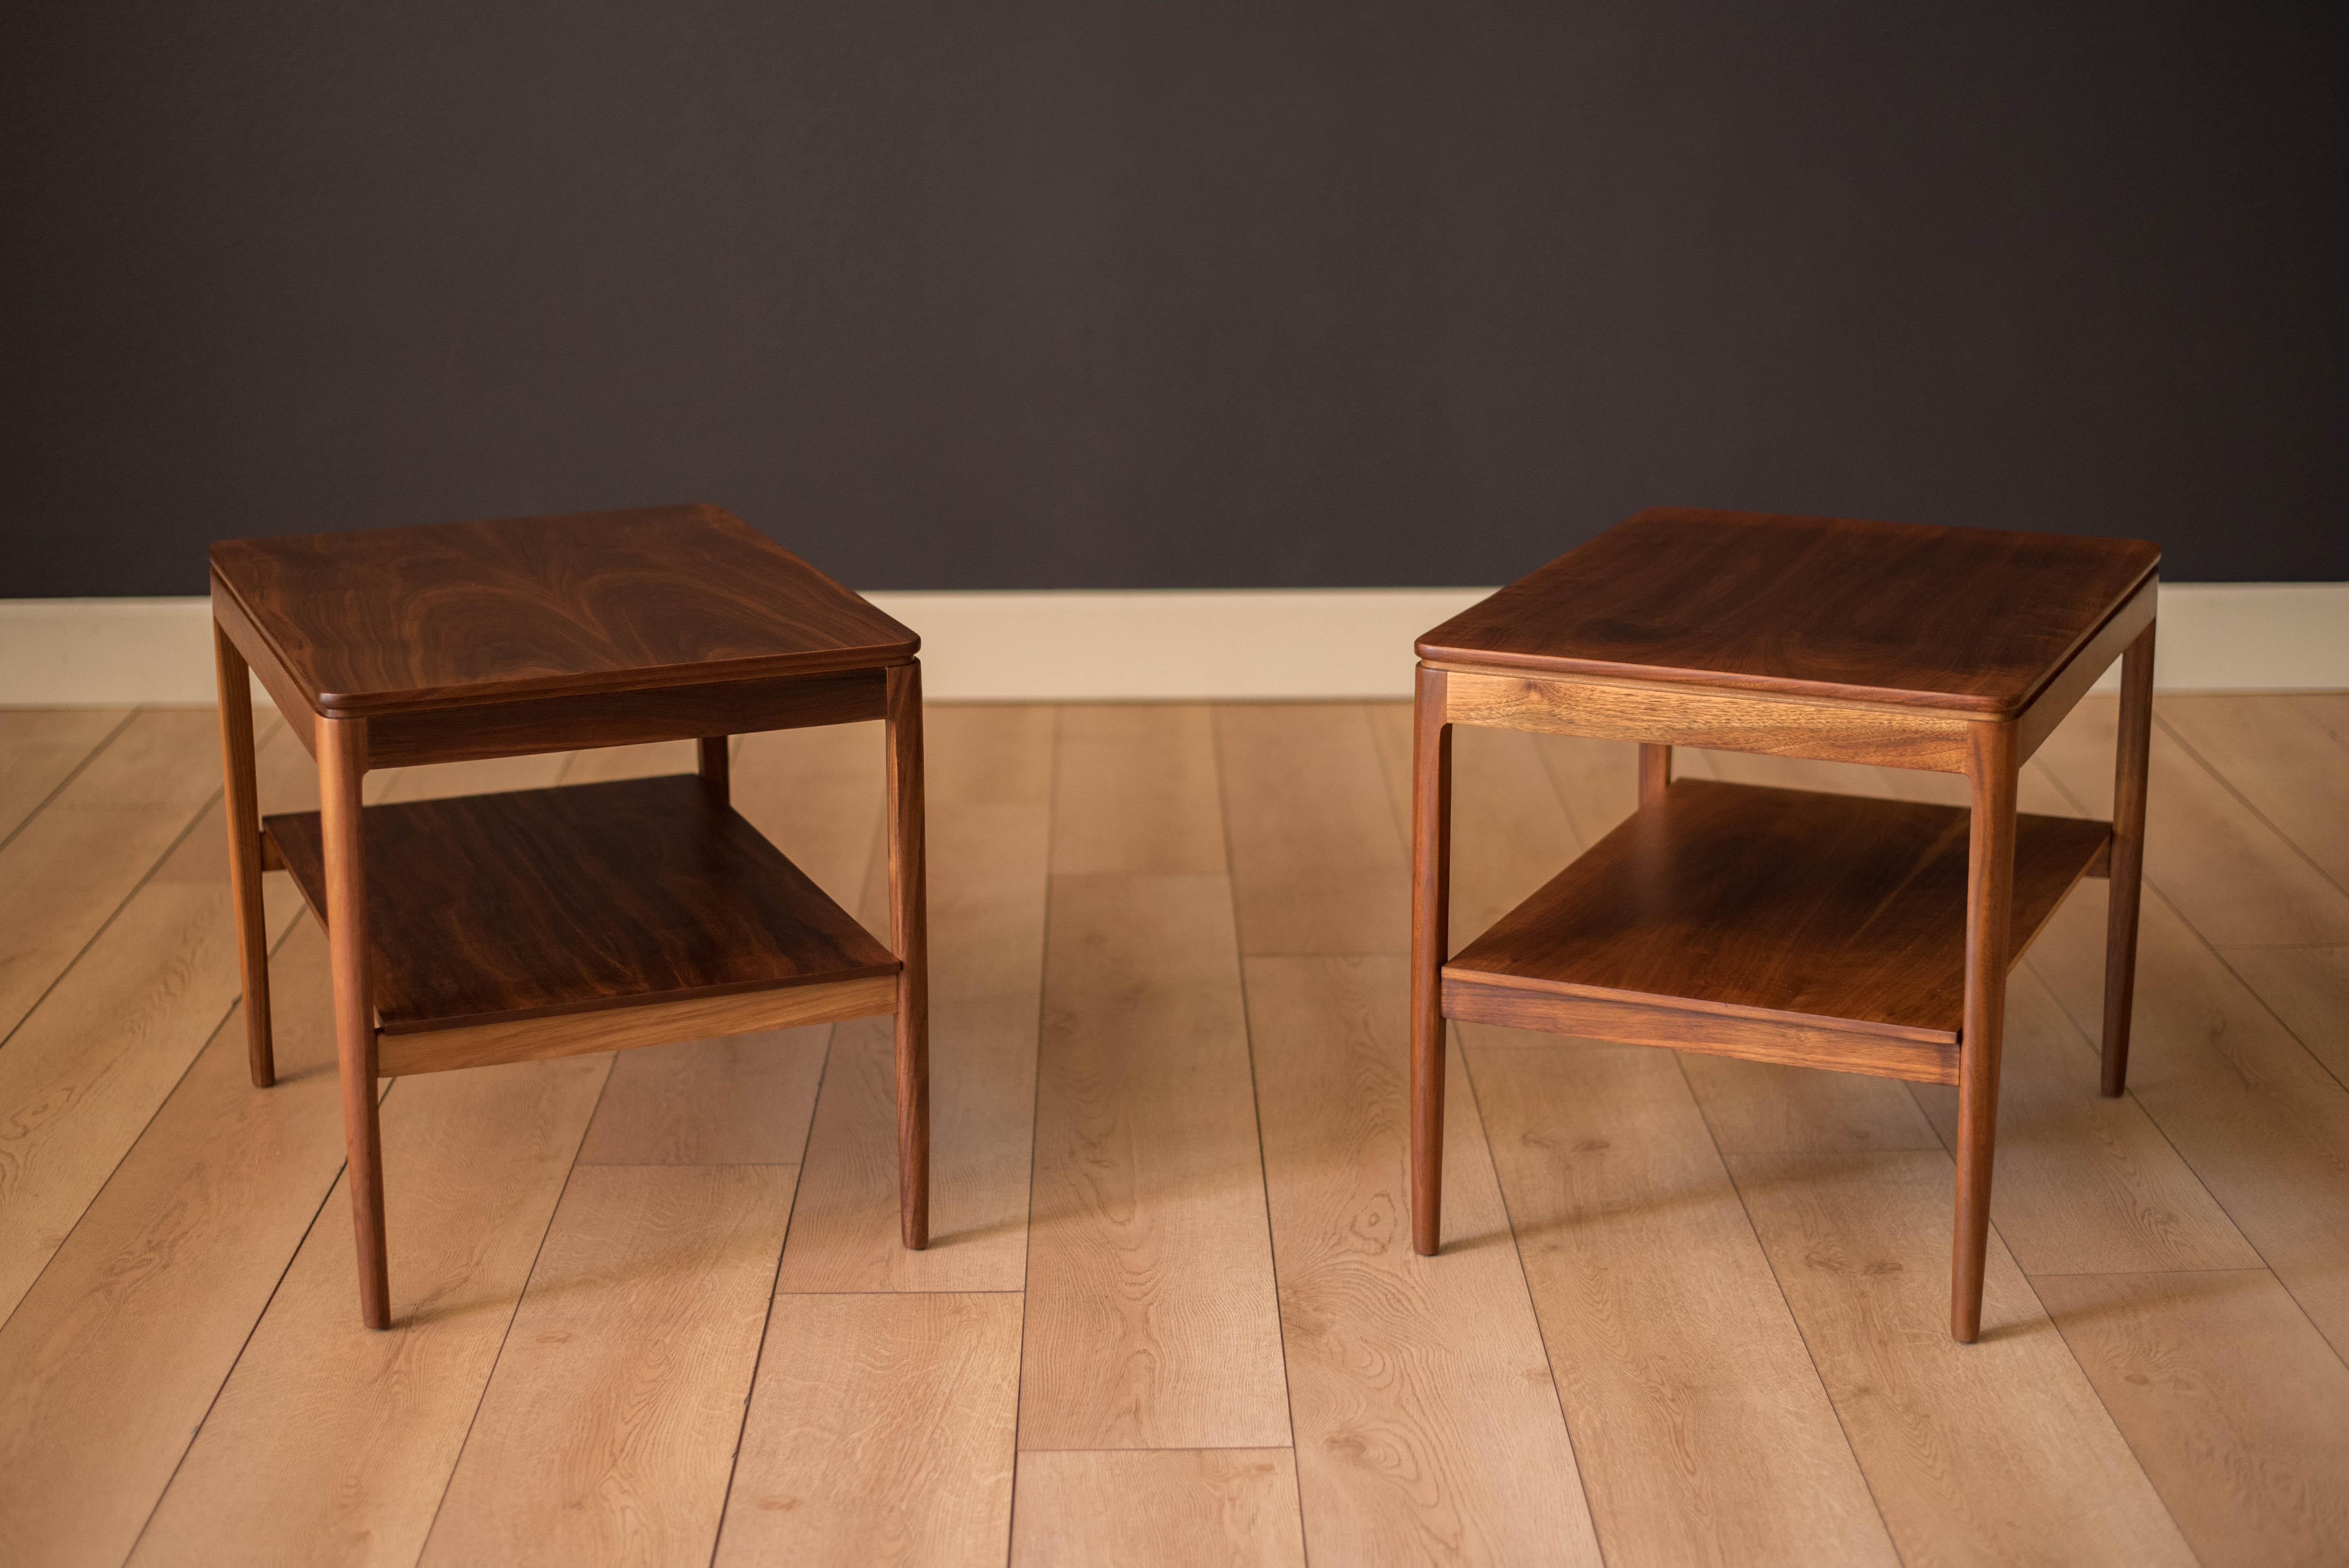 Vintage pair of side tables in walnut designed by Stewart McDougall & Kipp Stewart for Drexel Declaration. This set displays rich walnut grains and a two-tier shelf design. Price is for the pair.